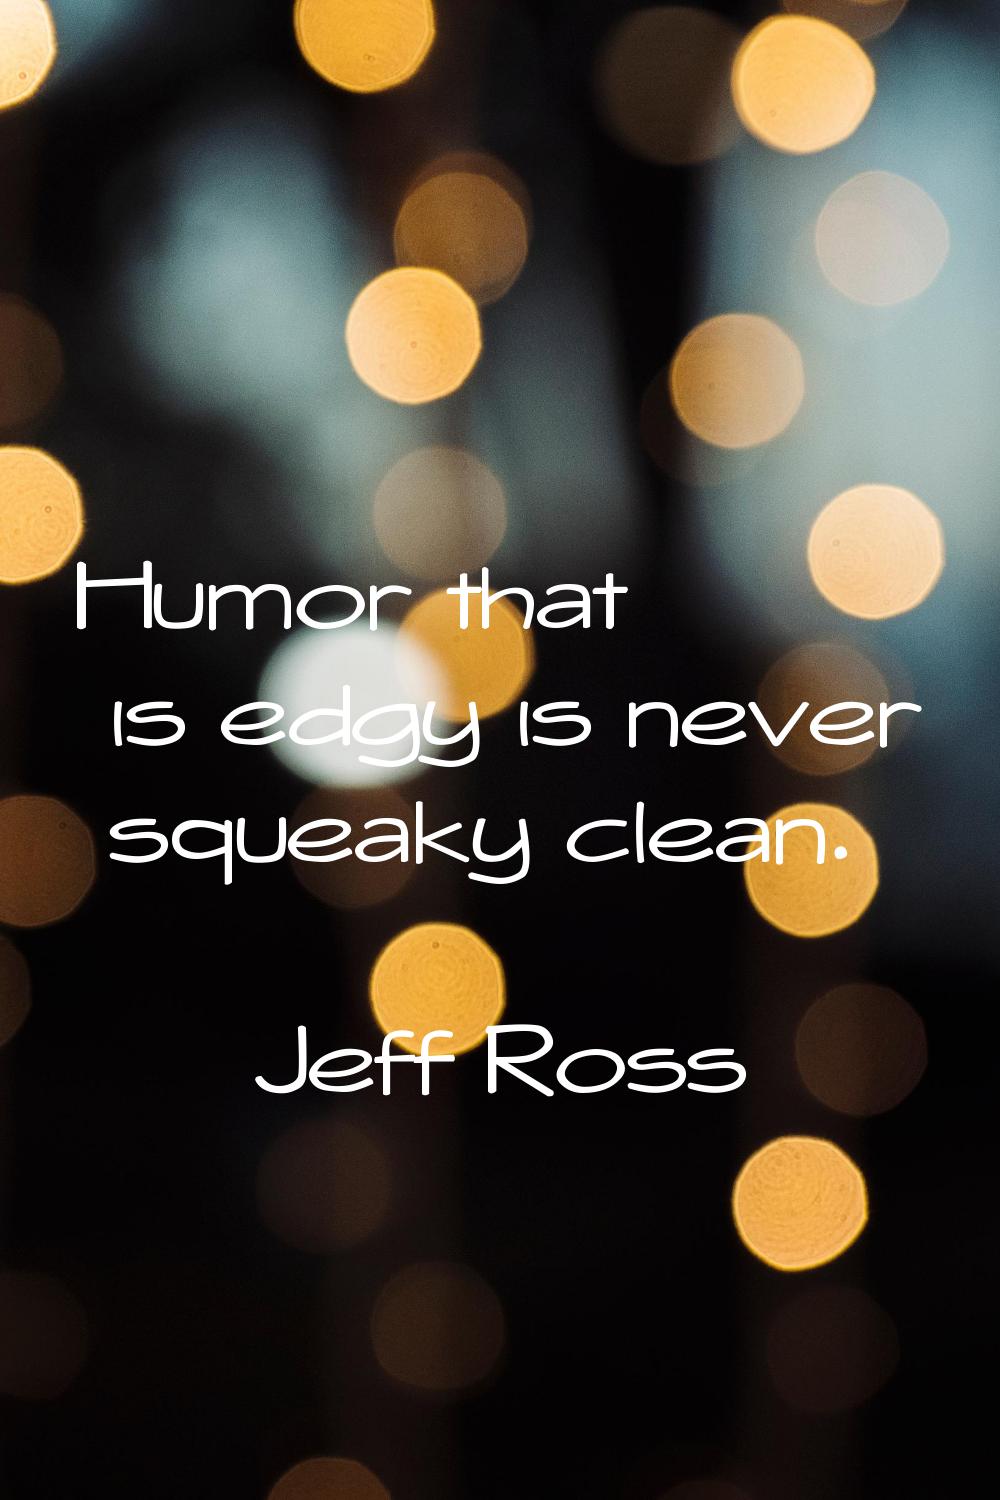 Humor that is edgy is never squeaky clean.